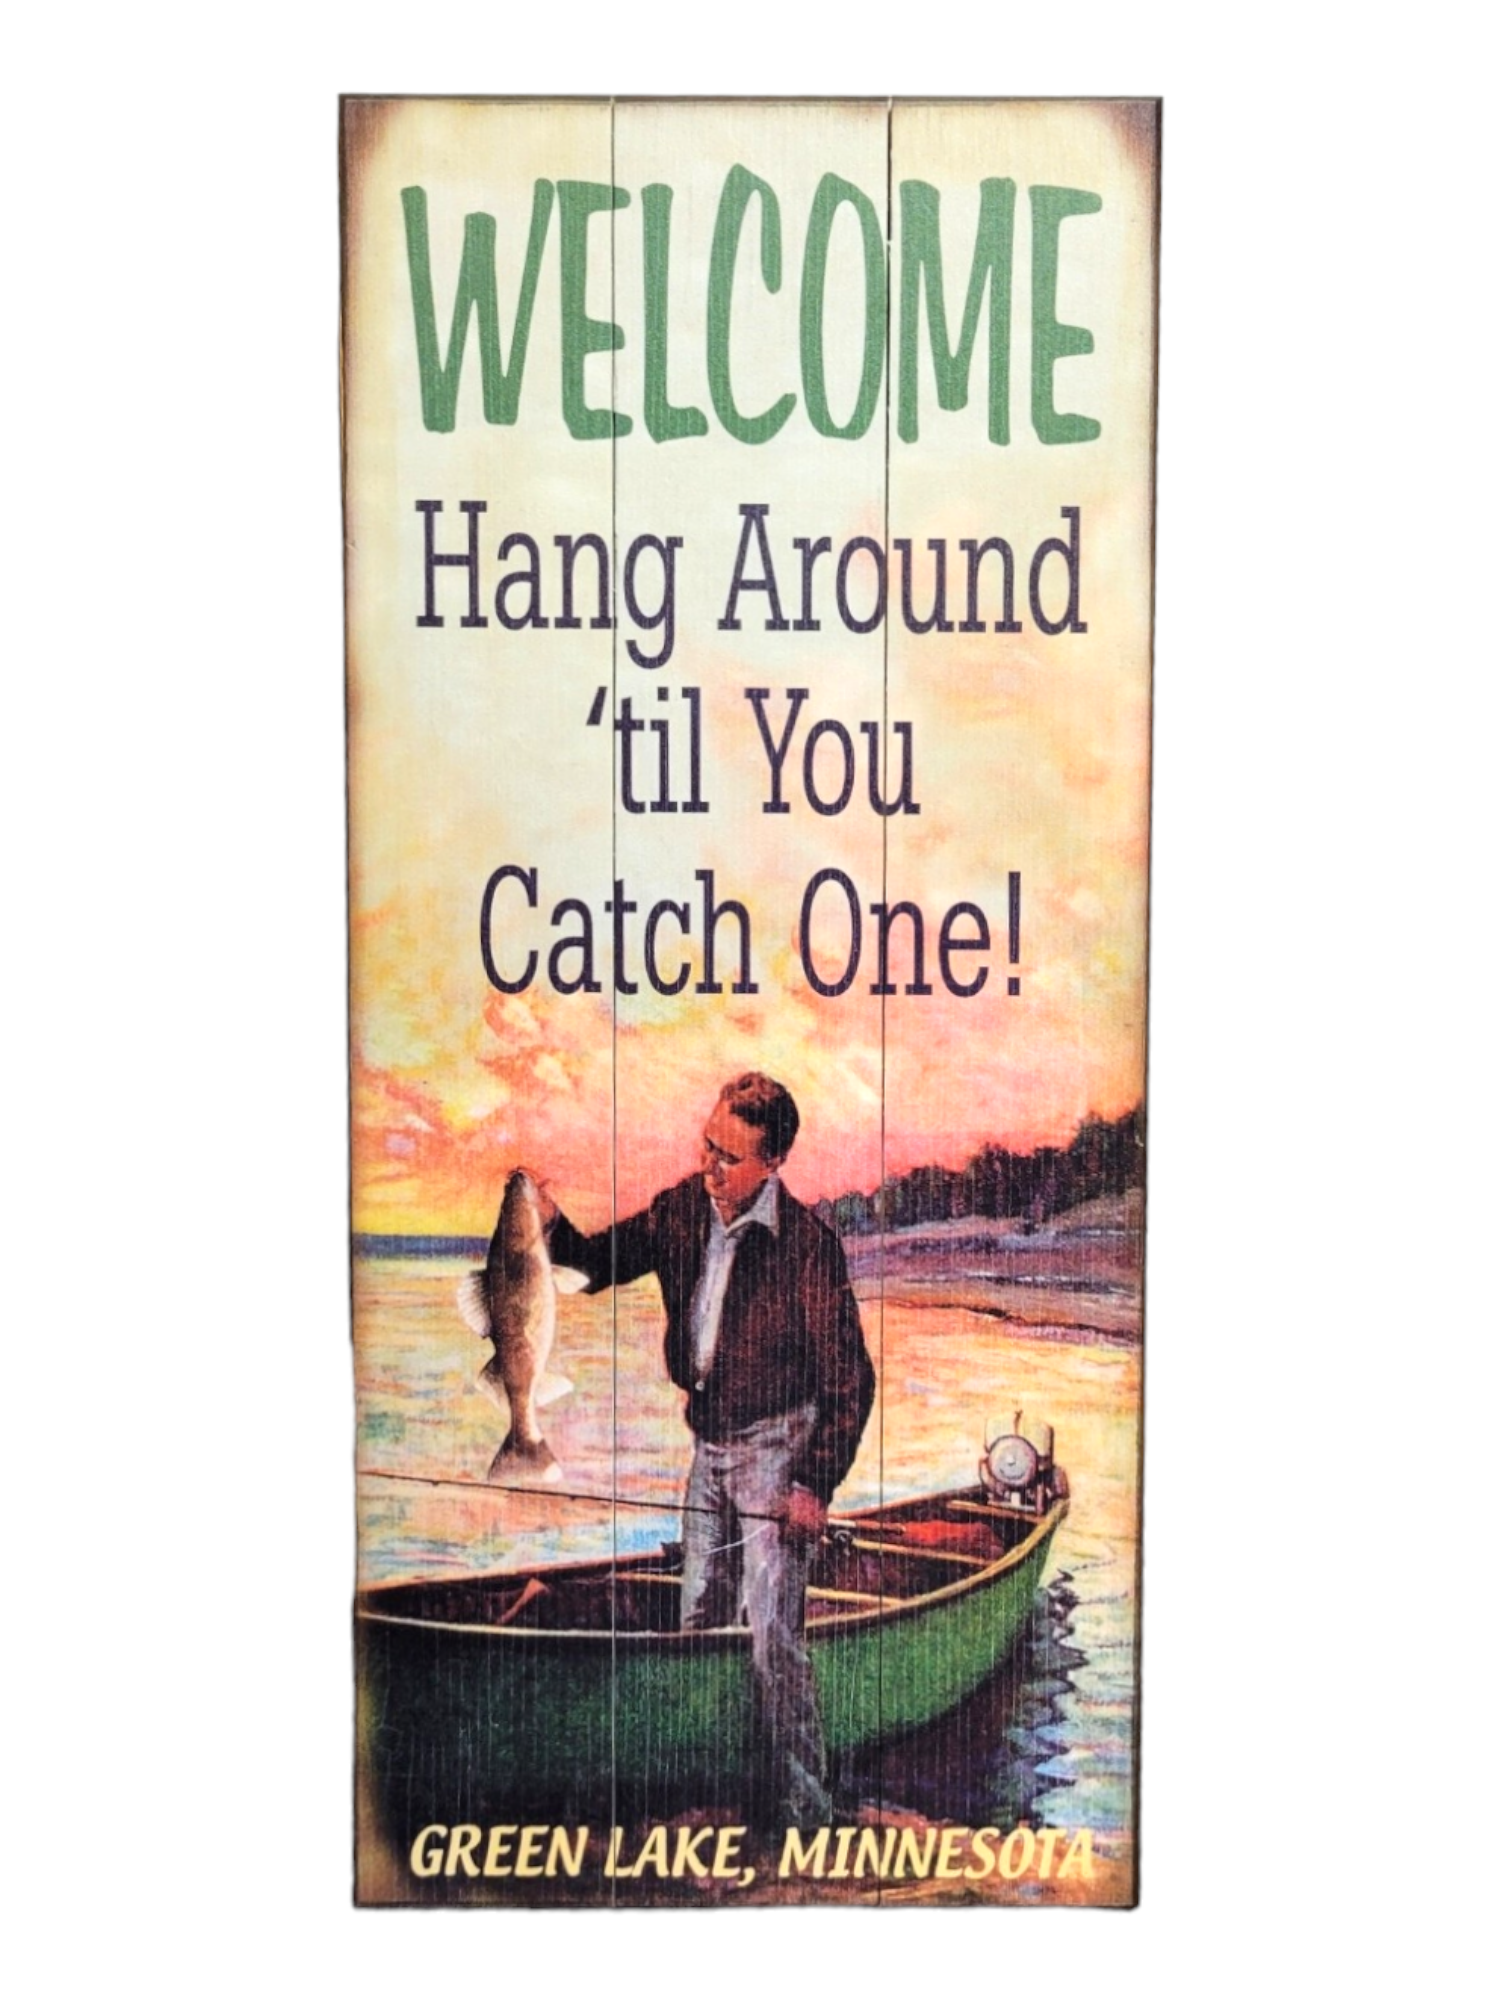 Sign: "Welcome Hang Around 'til You Catch One!" - Green Lake